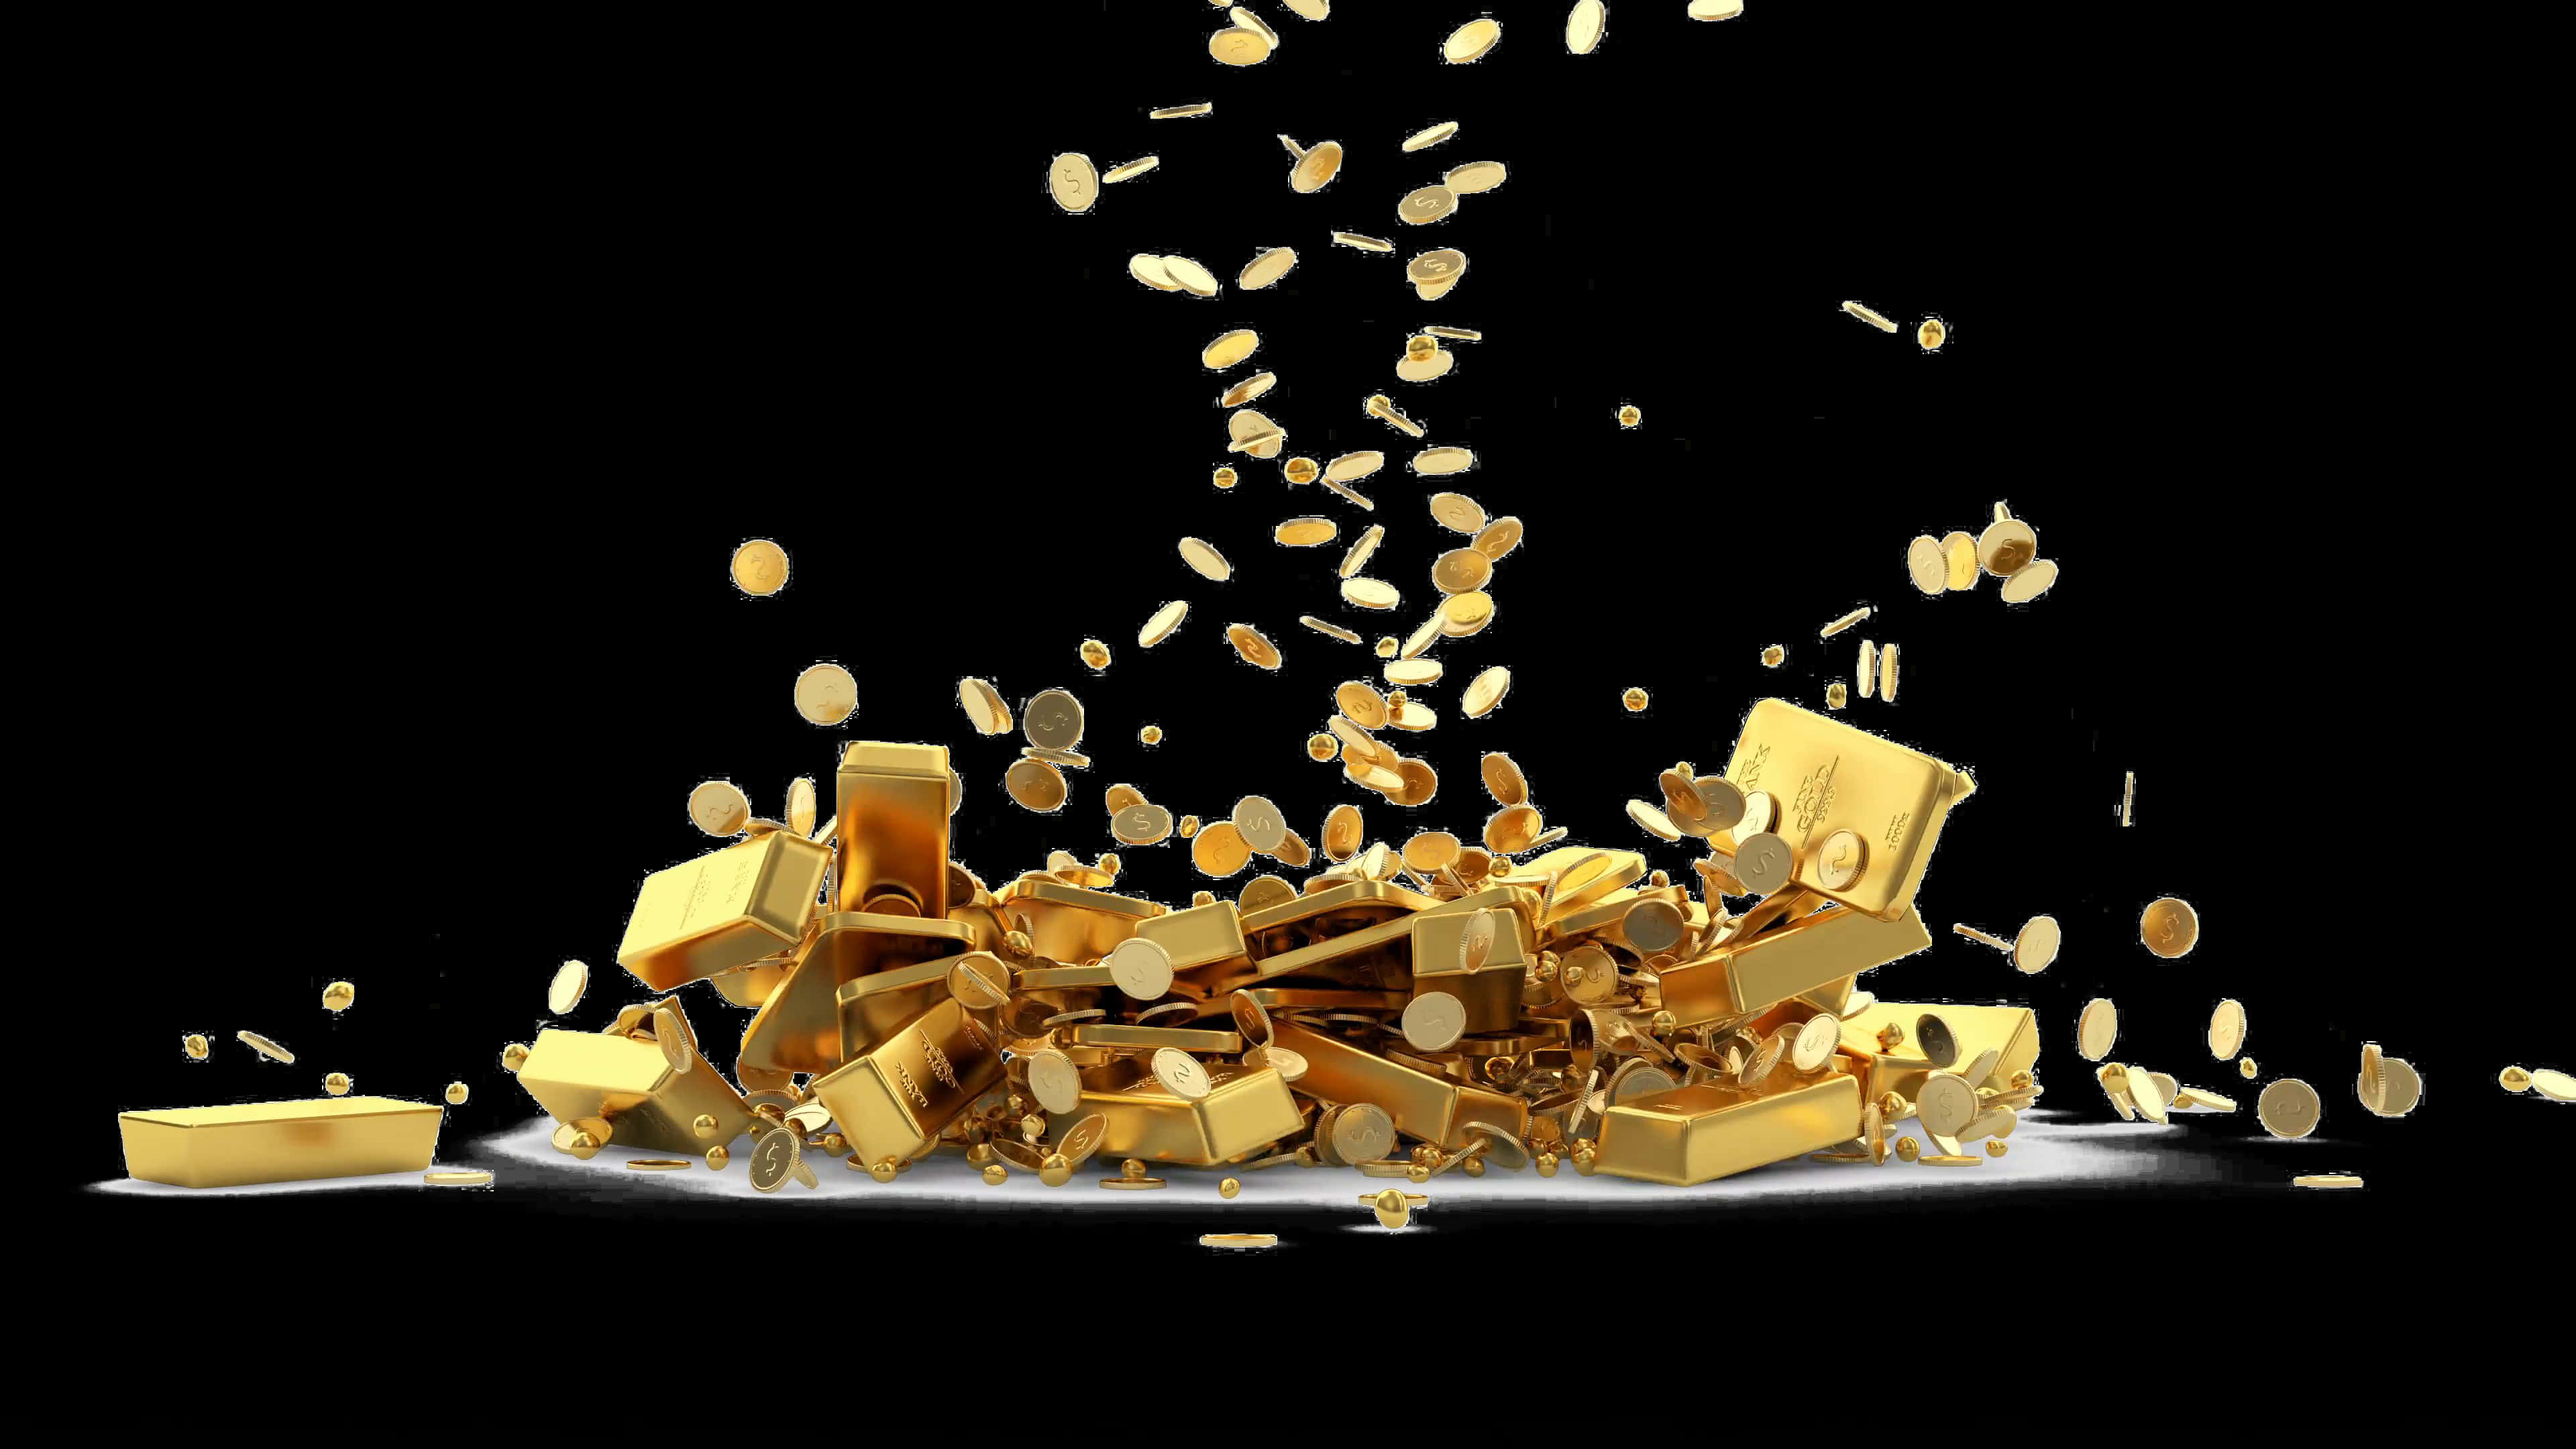 A Pile Of Gold Bars And Coins